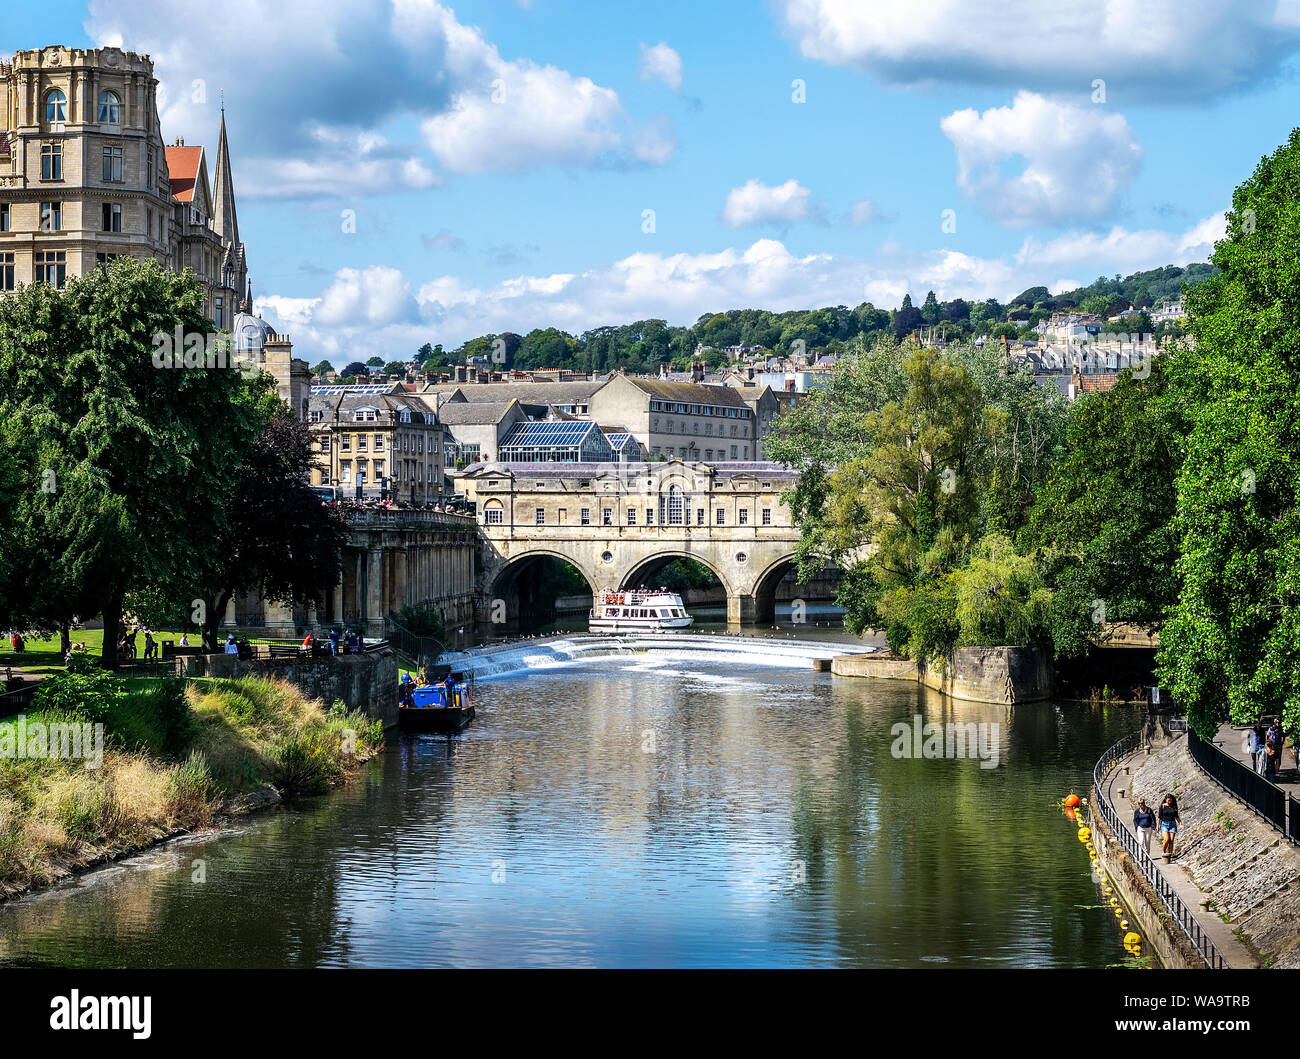 The famous Pulteney Bridge, Bath with shops lining both sides. A crossing over the River Avon Stock Photo